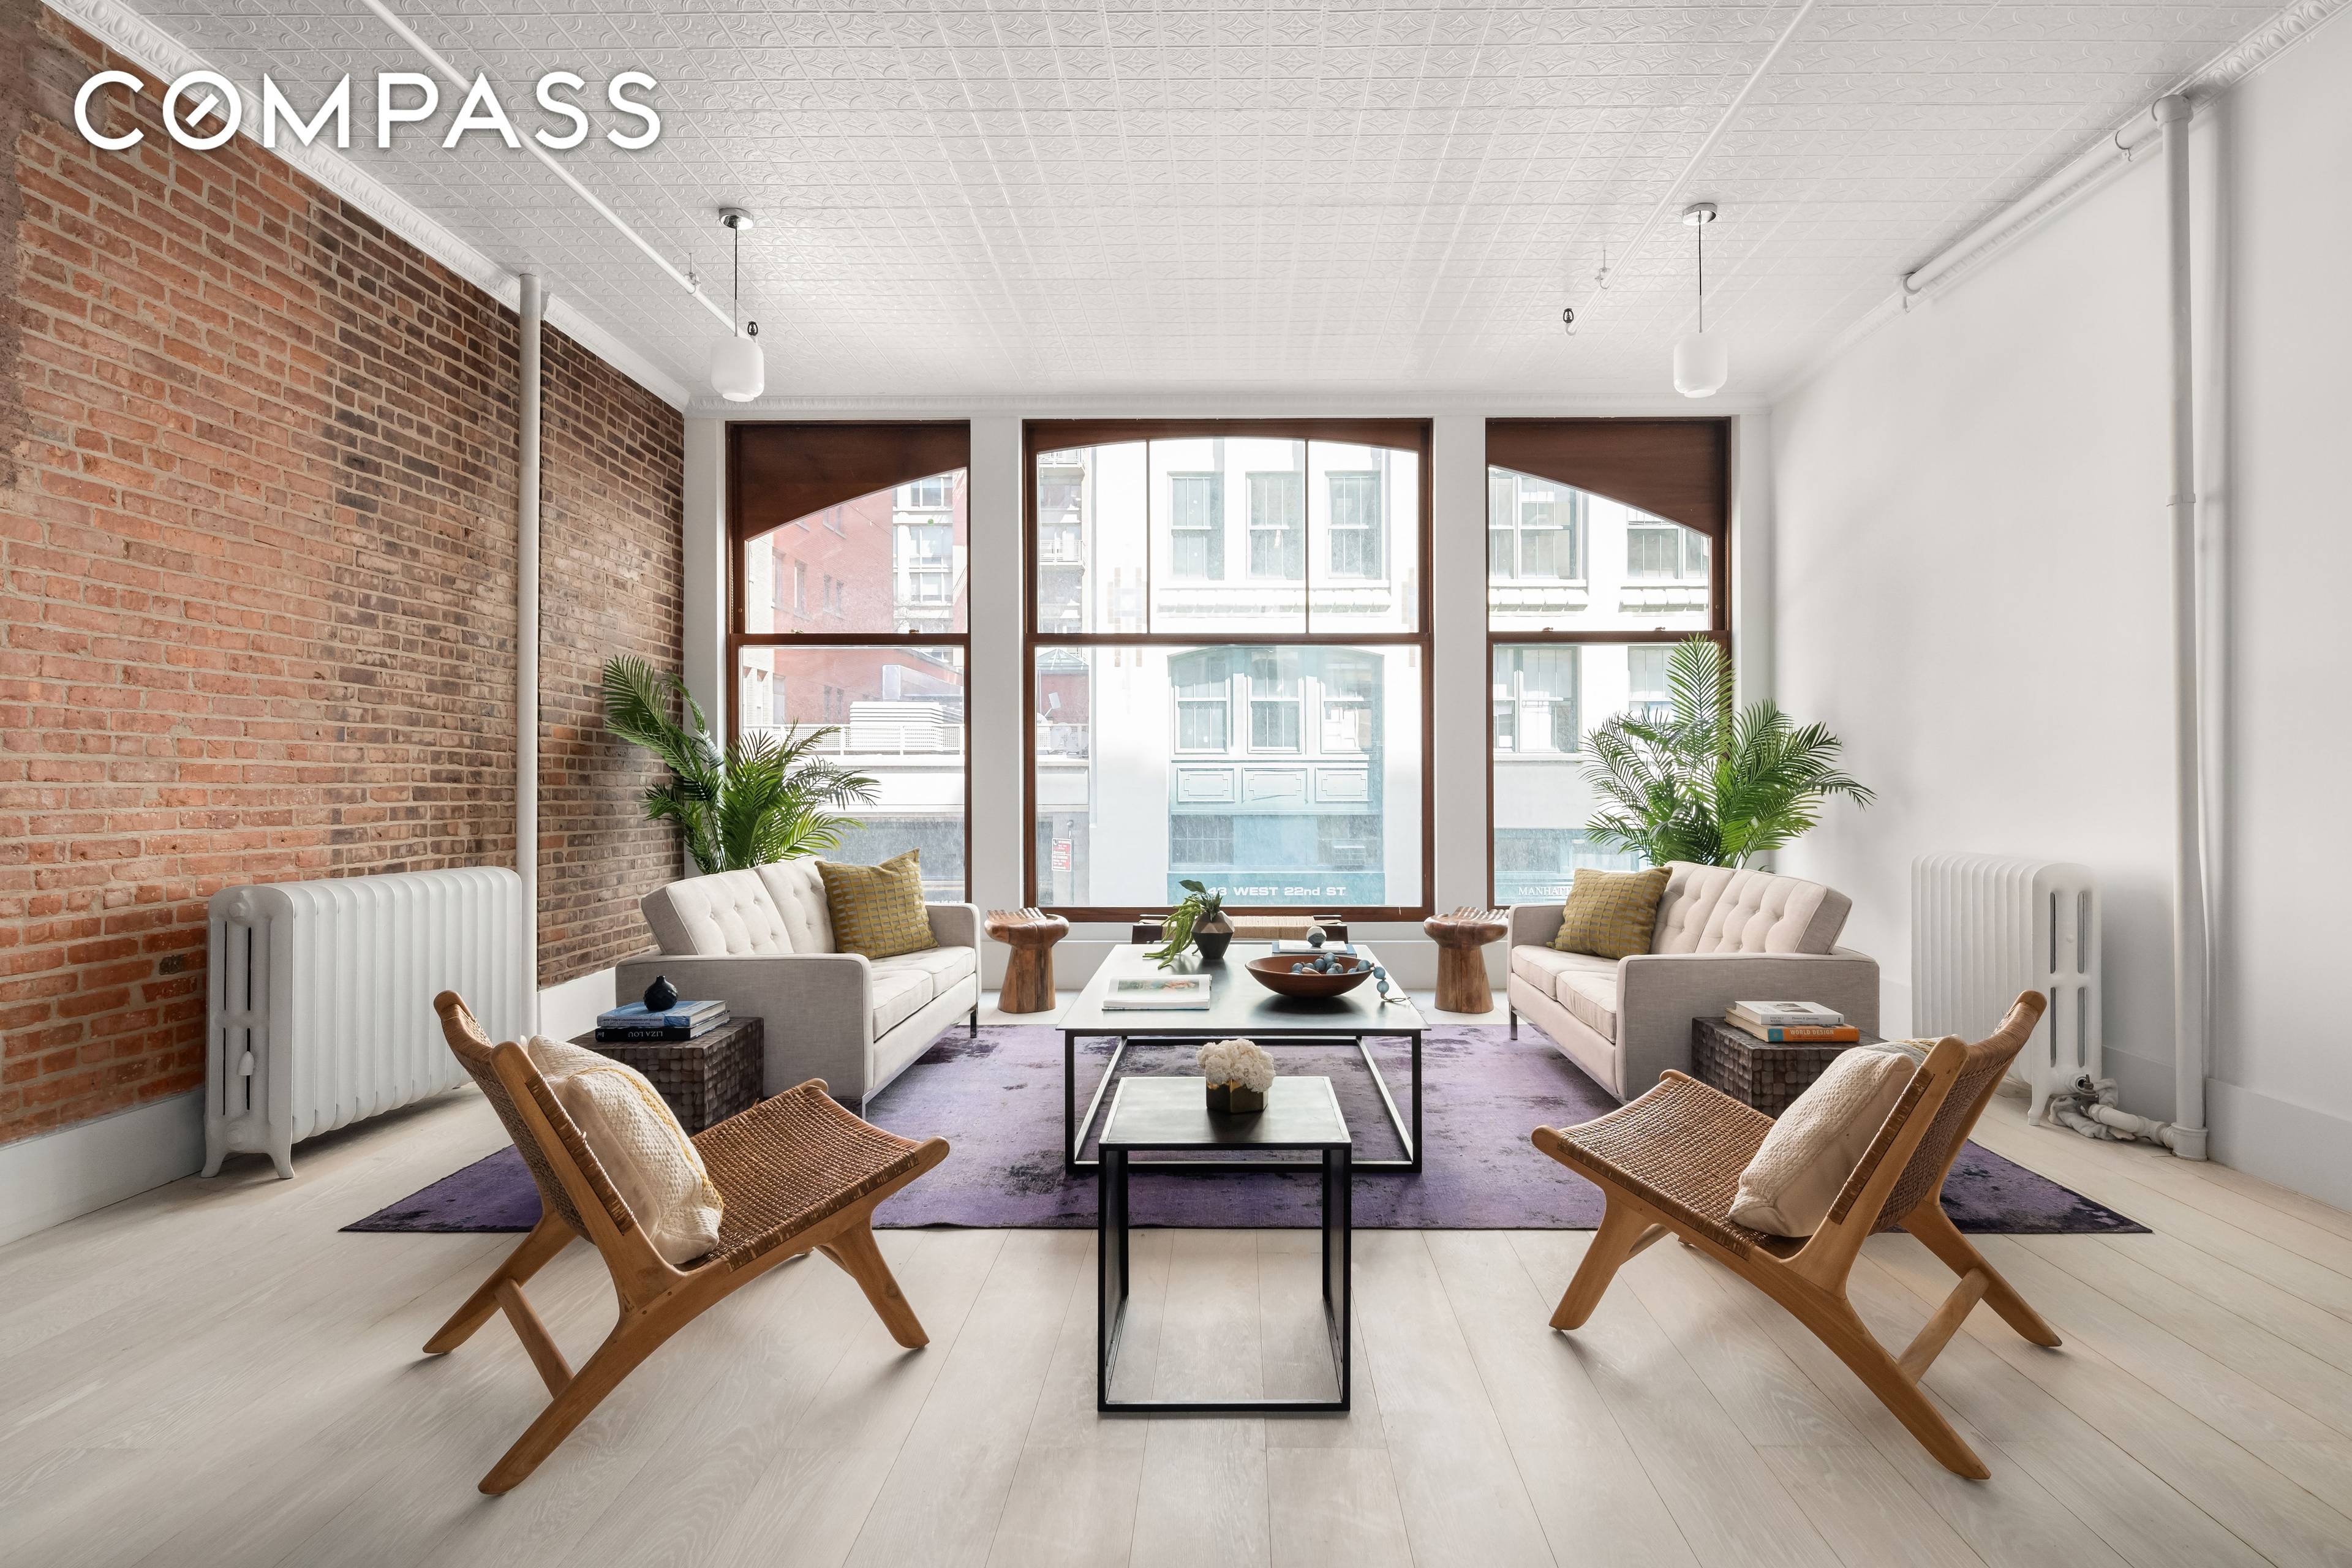 Welcome to this completely and newly renovated, never been lived in, full floor 2 bedroom, 2 bathroom loft rental in a landmarked boutique Cooperative in the Flatiron district.